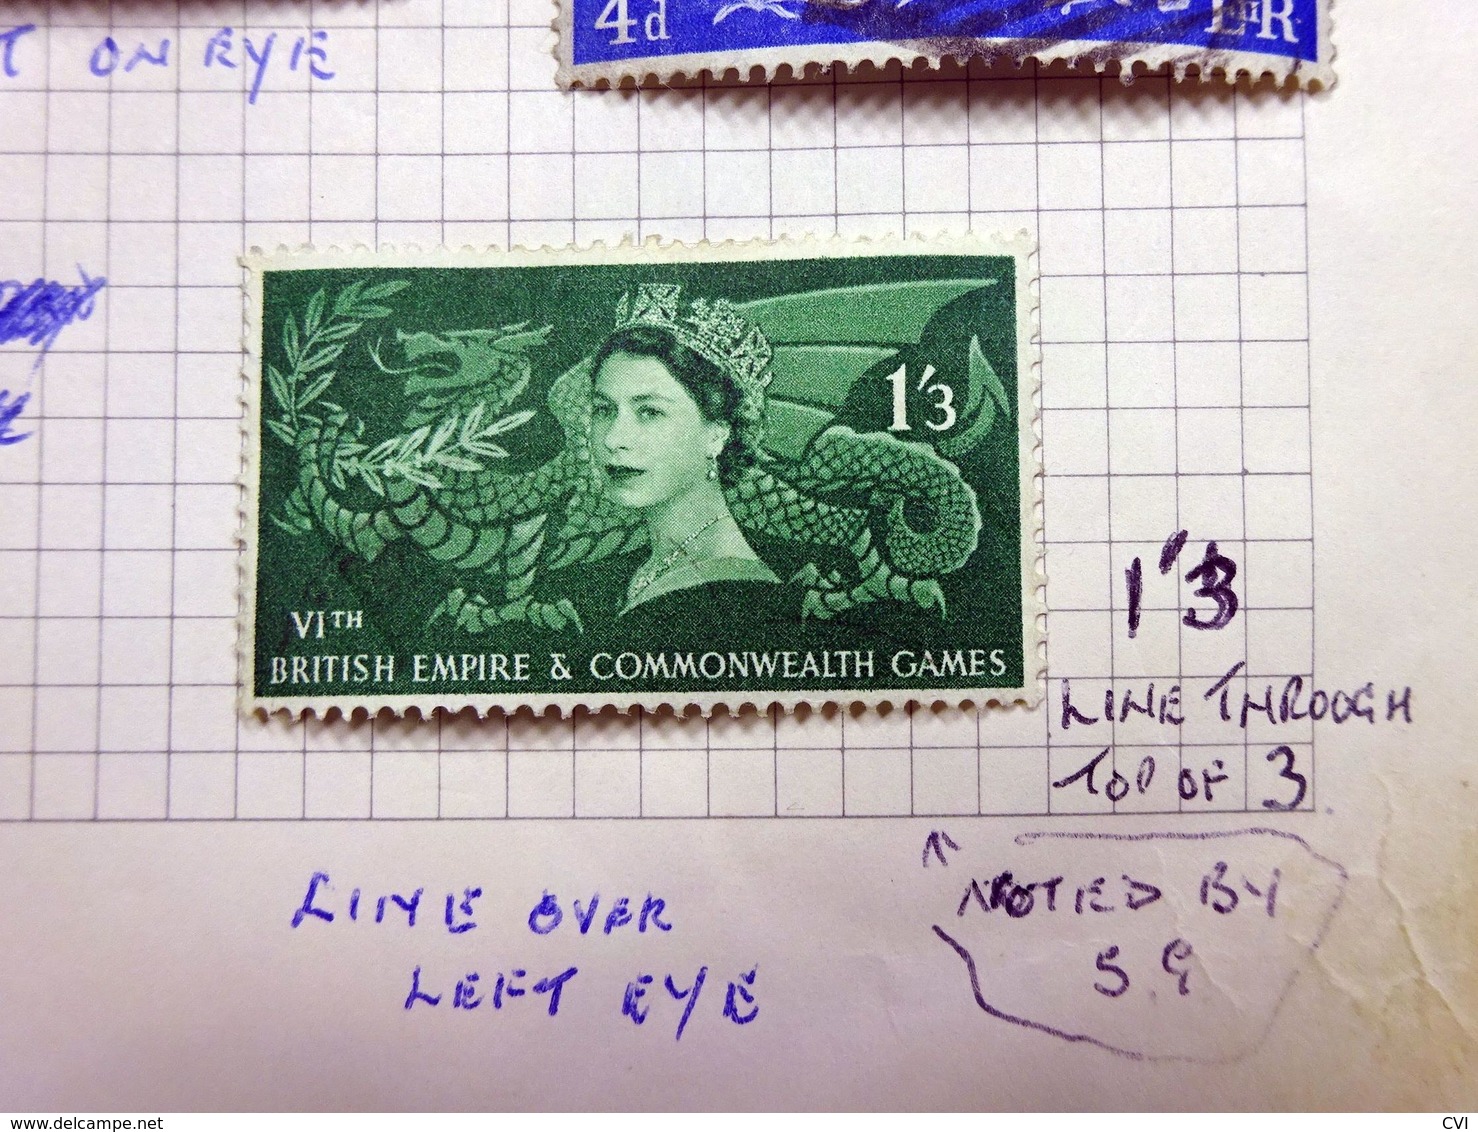 GB QEII 1952 - 1971 Pre-Decimal Selection, Errors, Postal Strike Covers, Letter from Stanley Gibbons, etc.